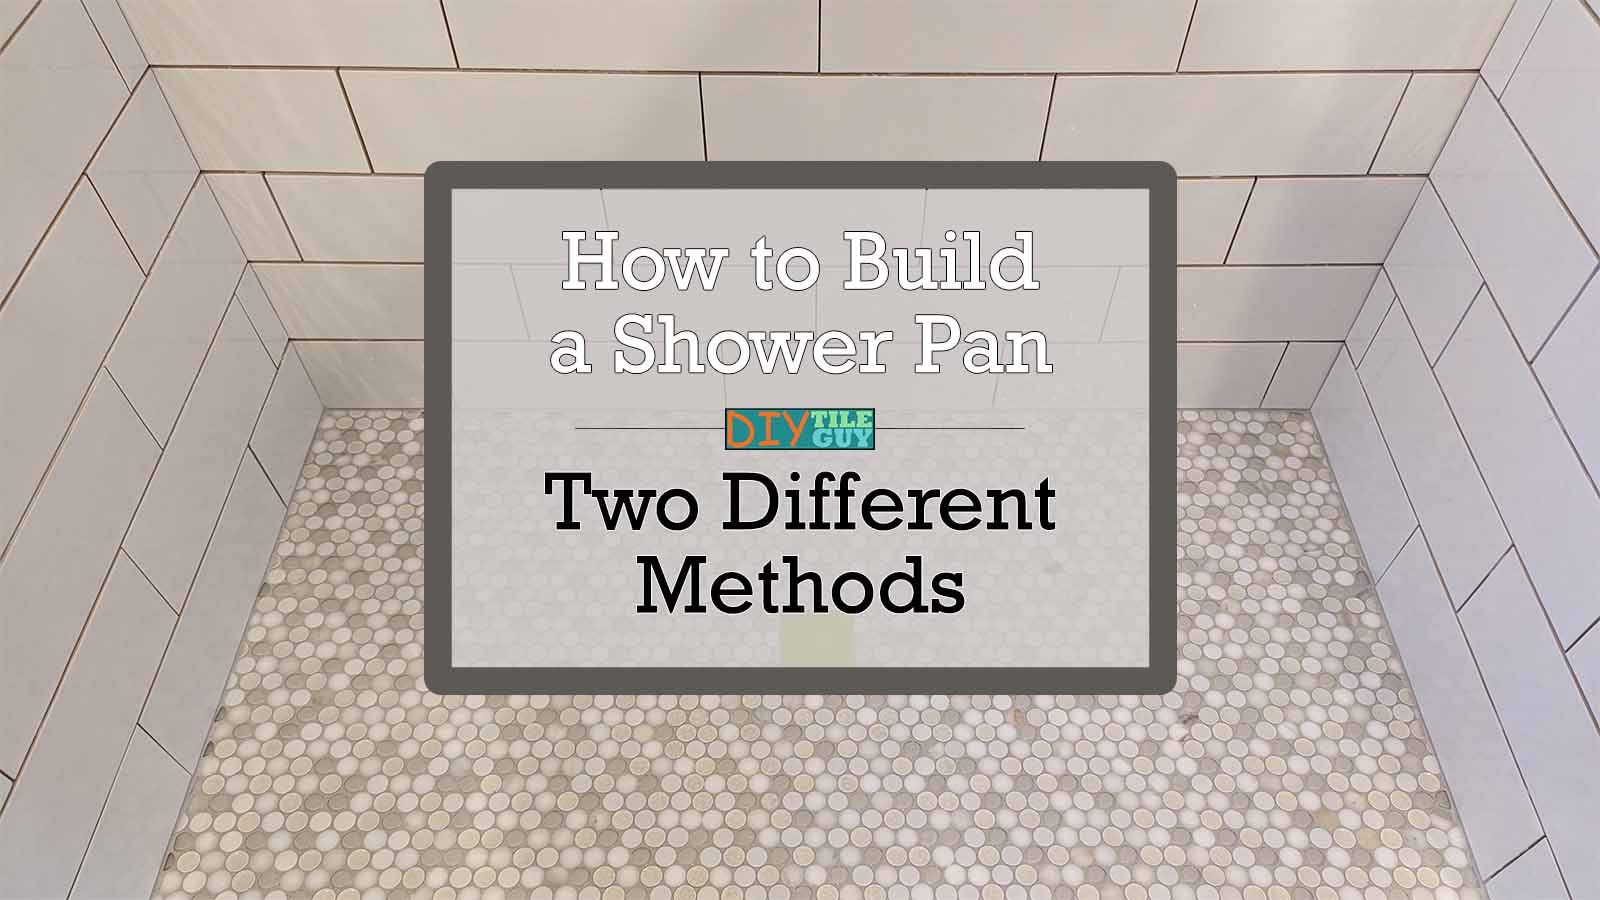 Your Guide to Shower Floor Materials